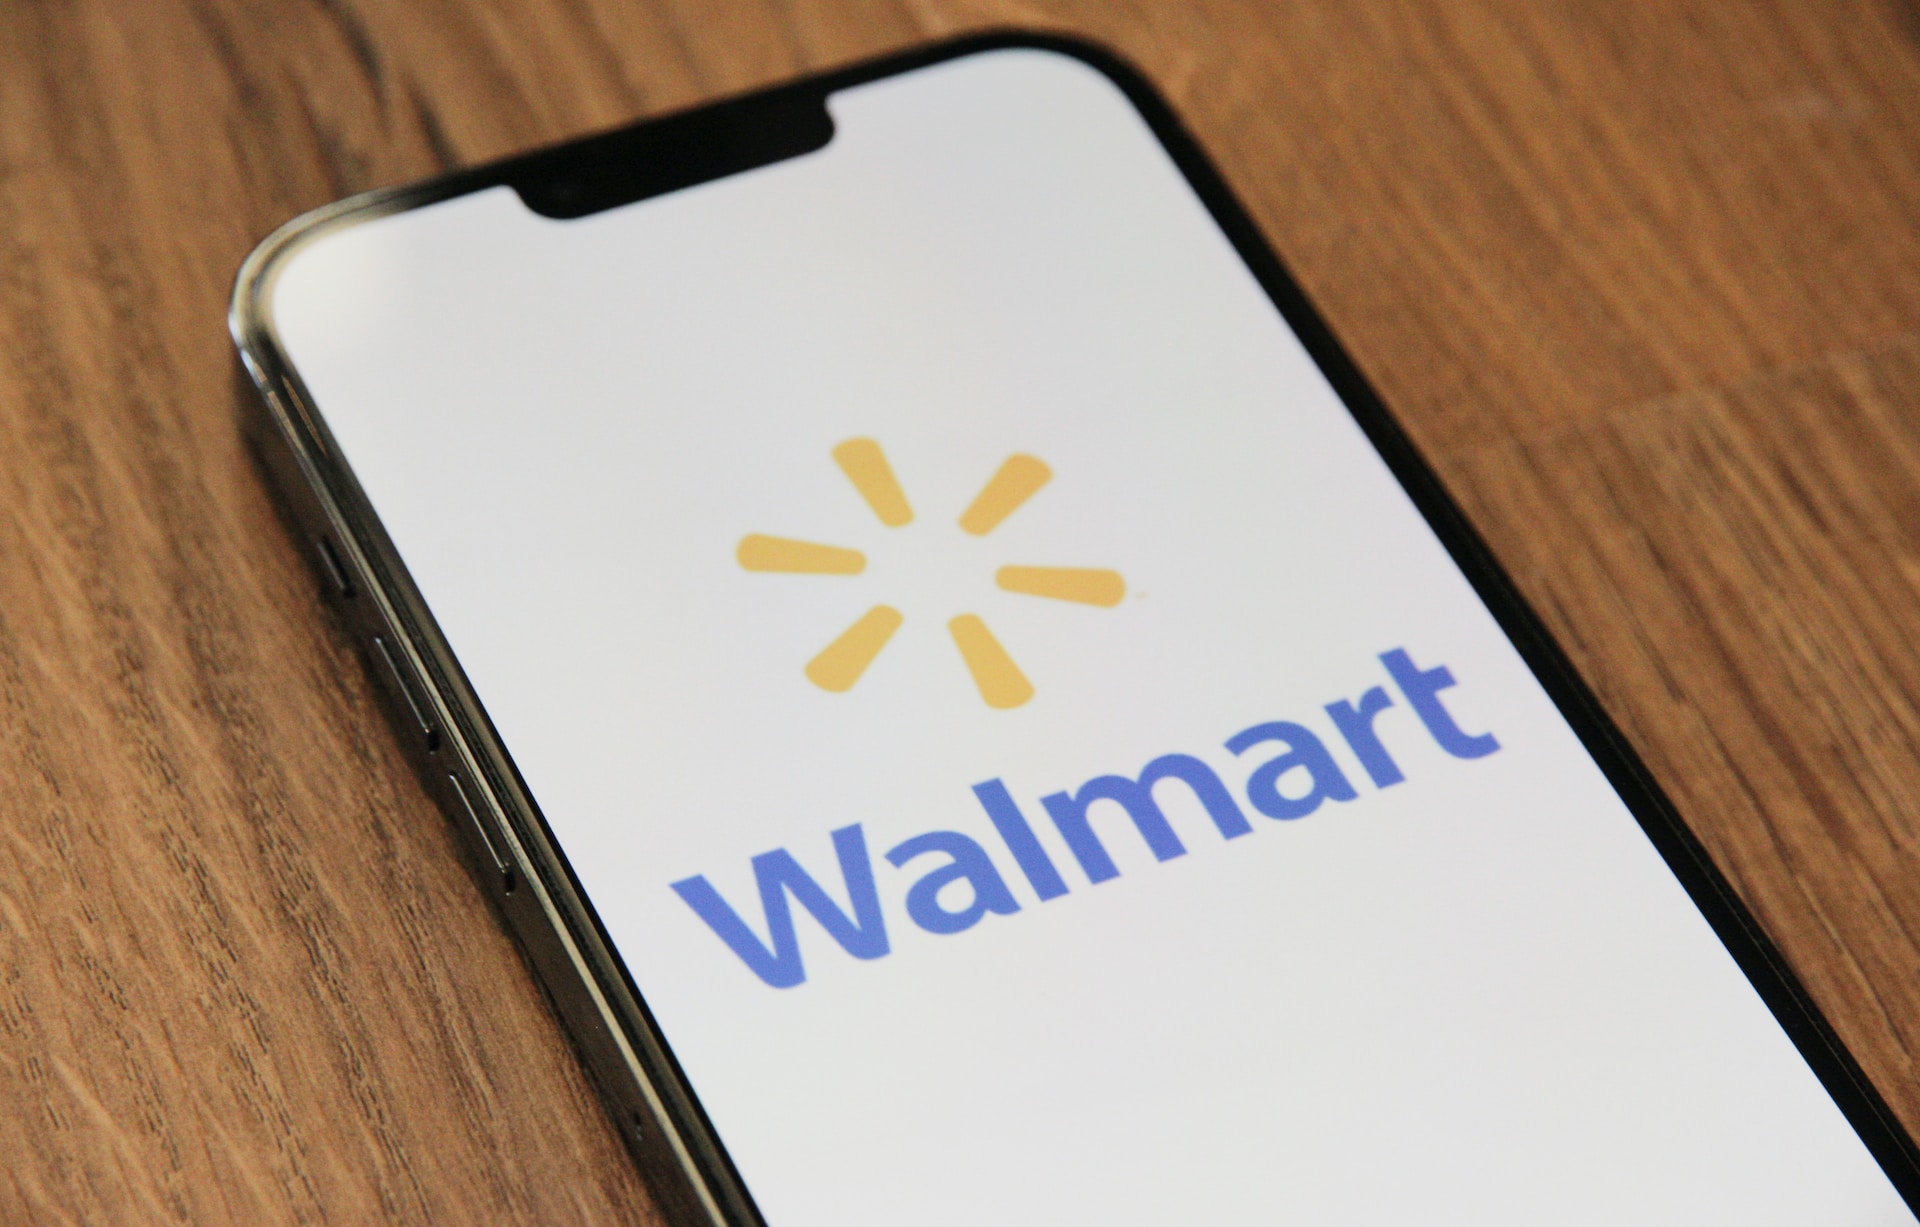 Mobile payments - Walmart logo on cell phone